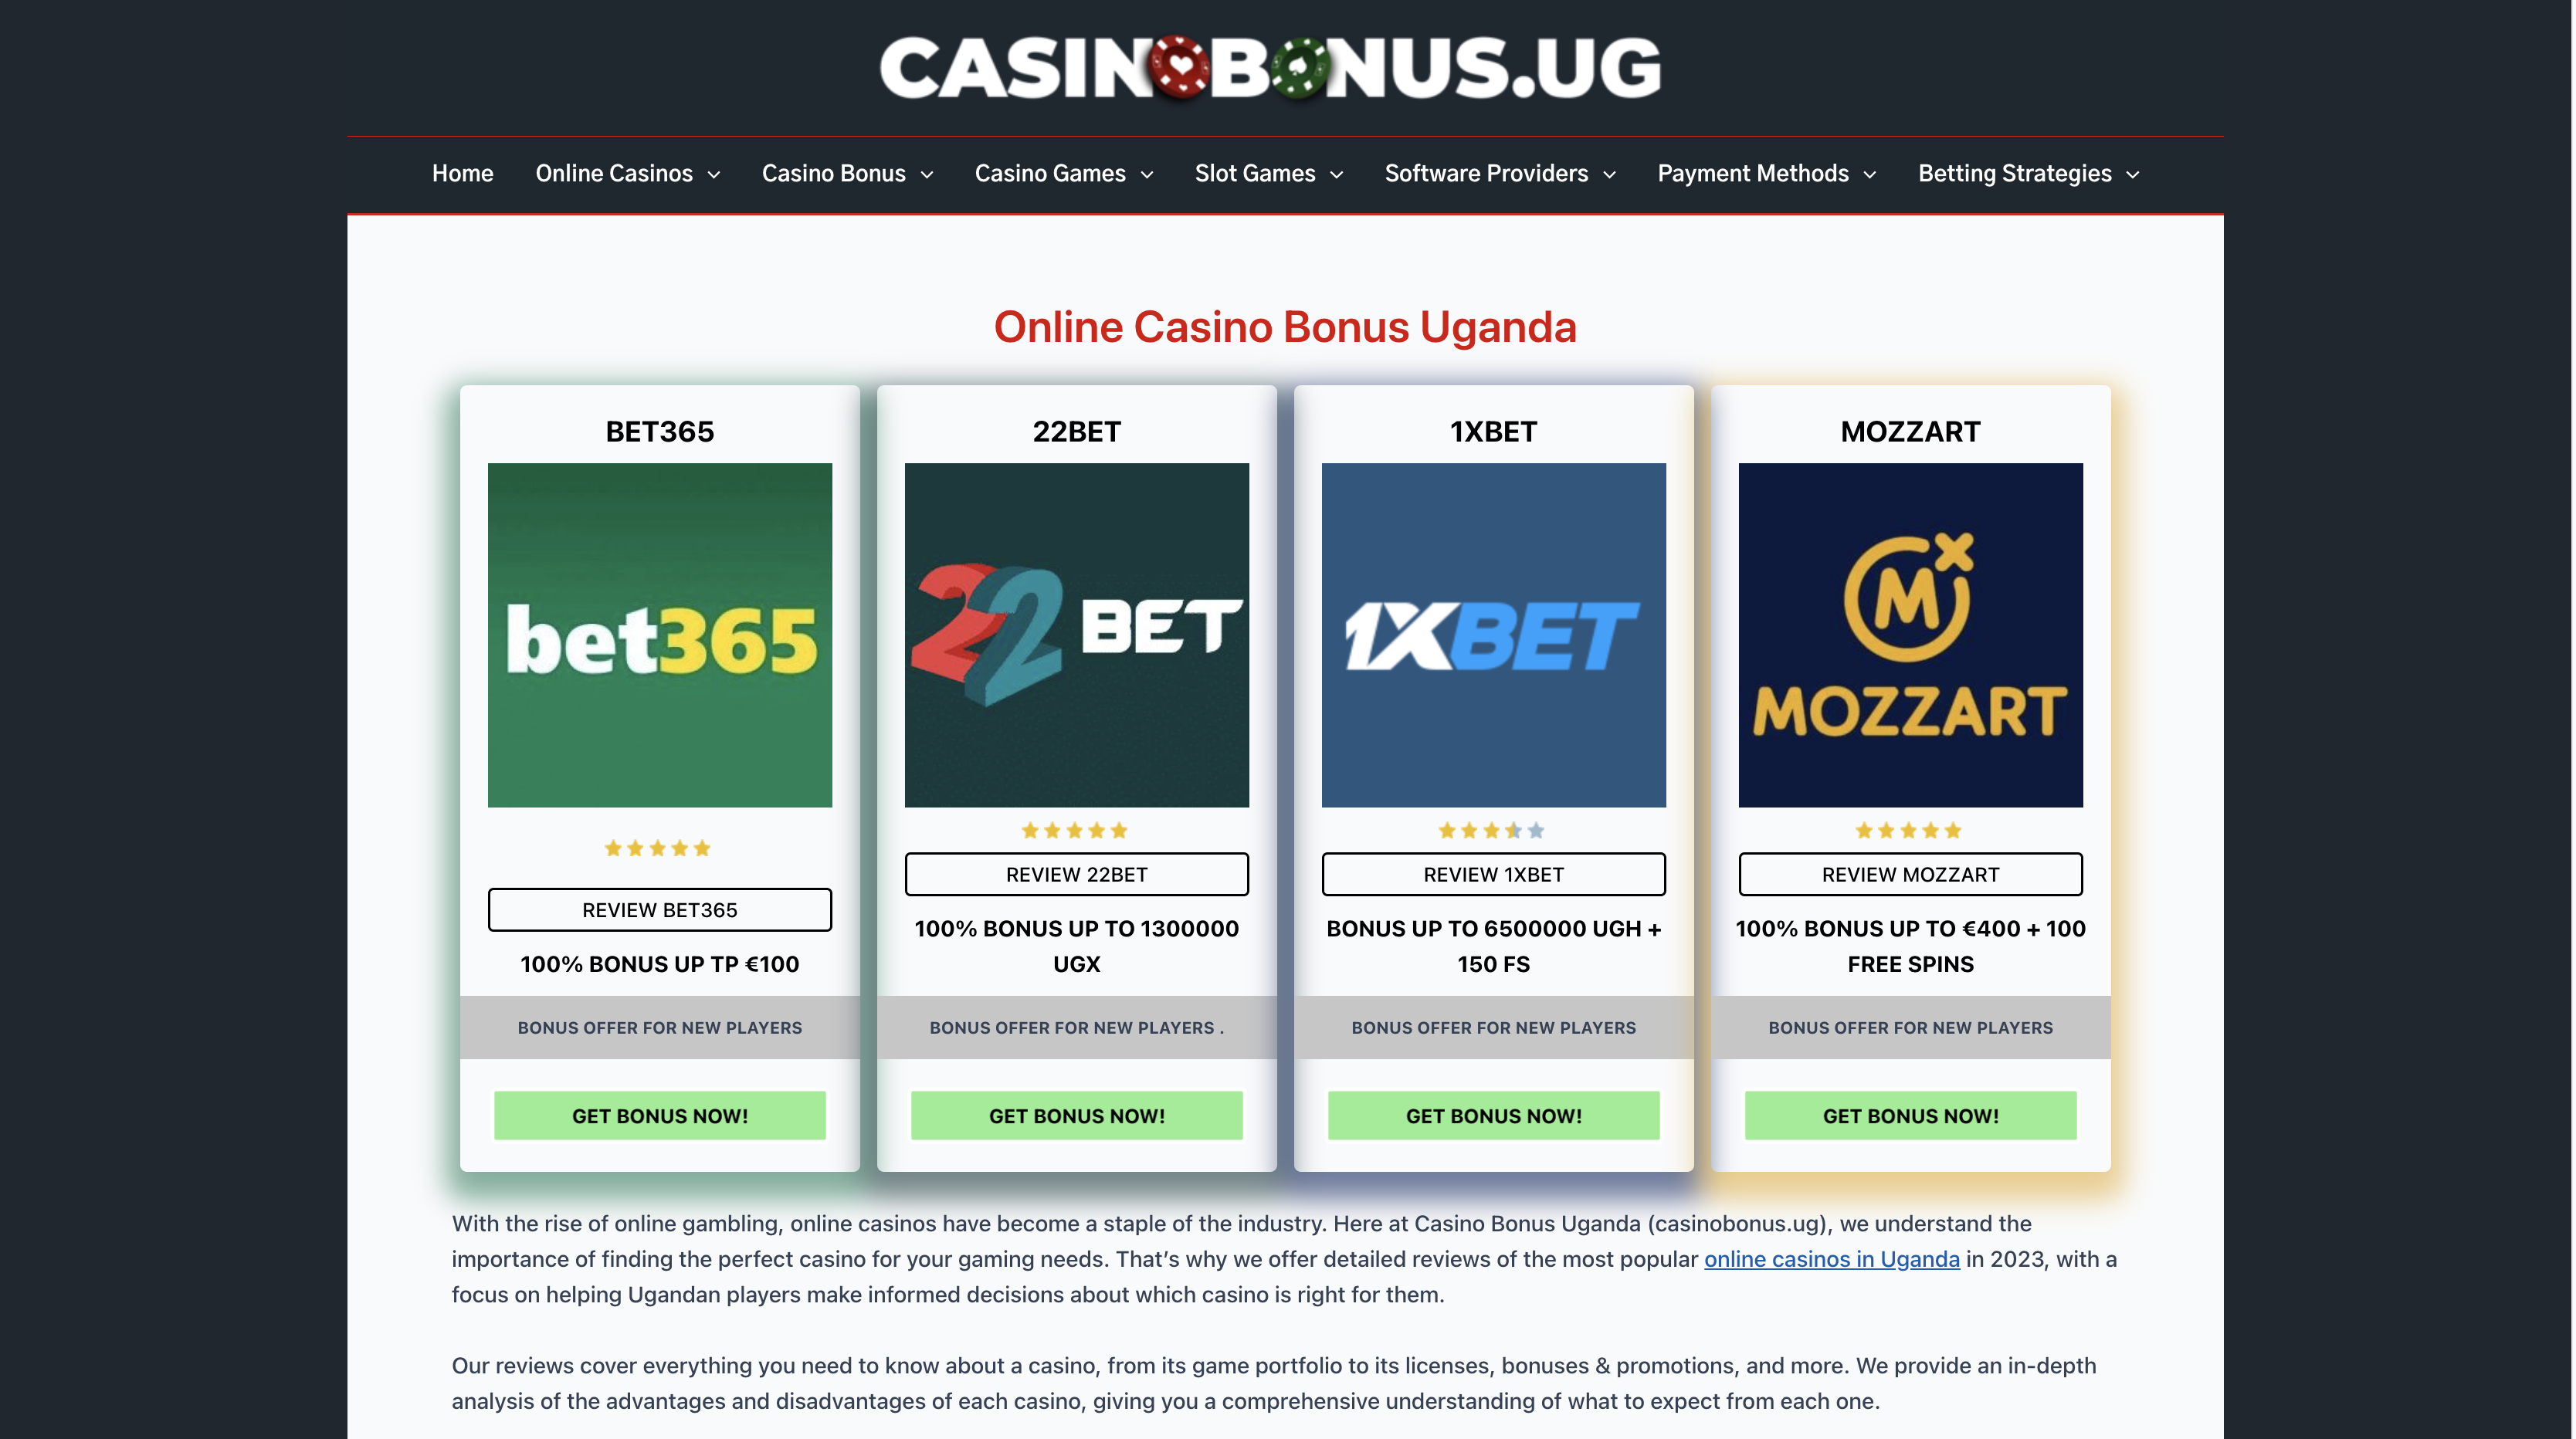 BMG Expands: Bringing Online Casino Excellence to Uganda!